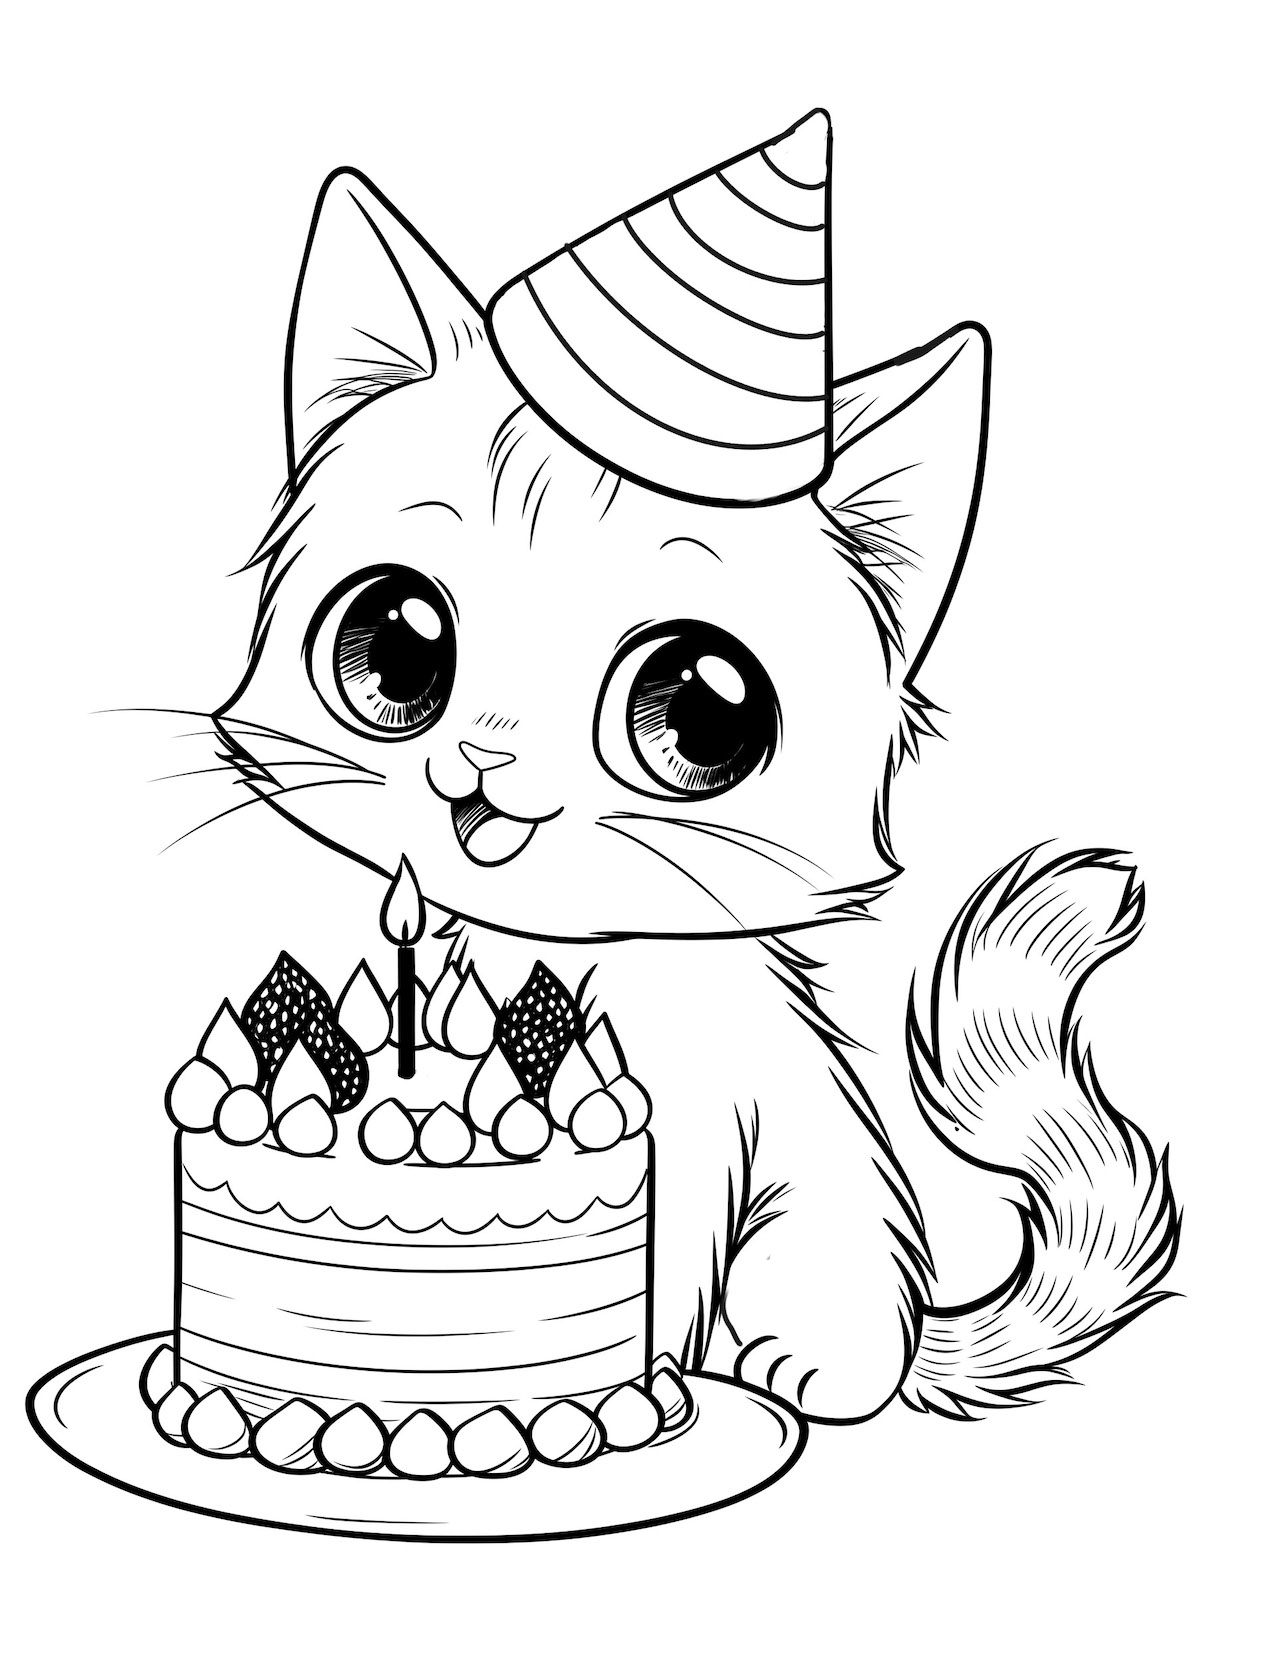 Cute kitten. Hand drawing coloring for kids and adults. Beautiful